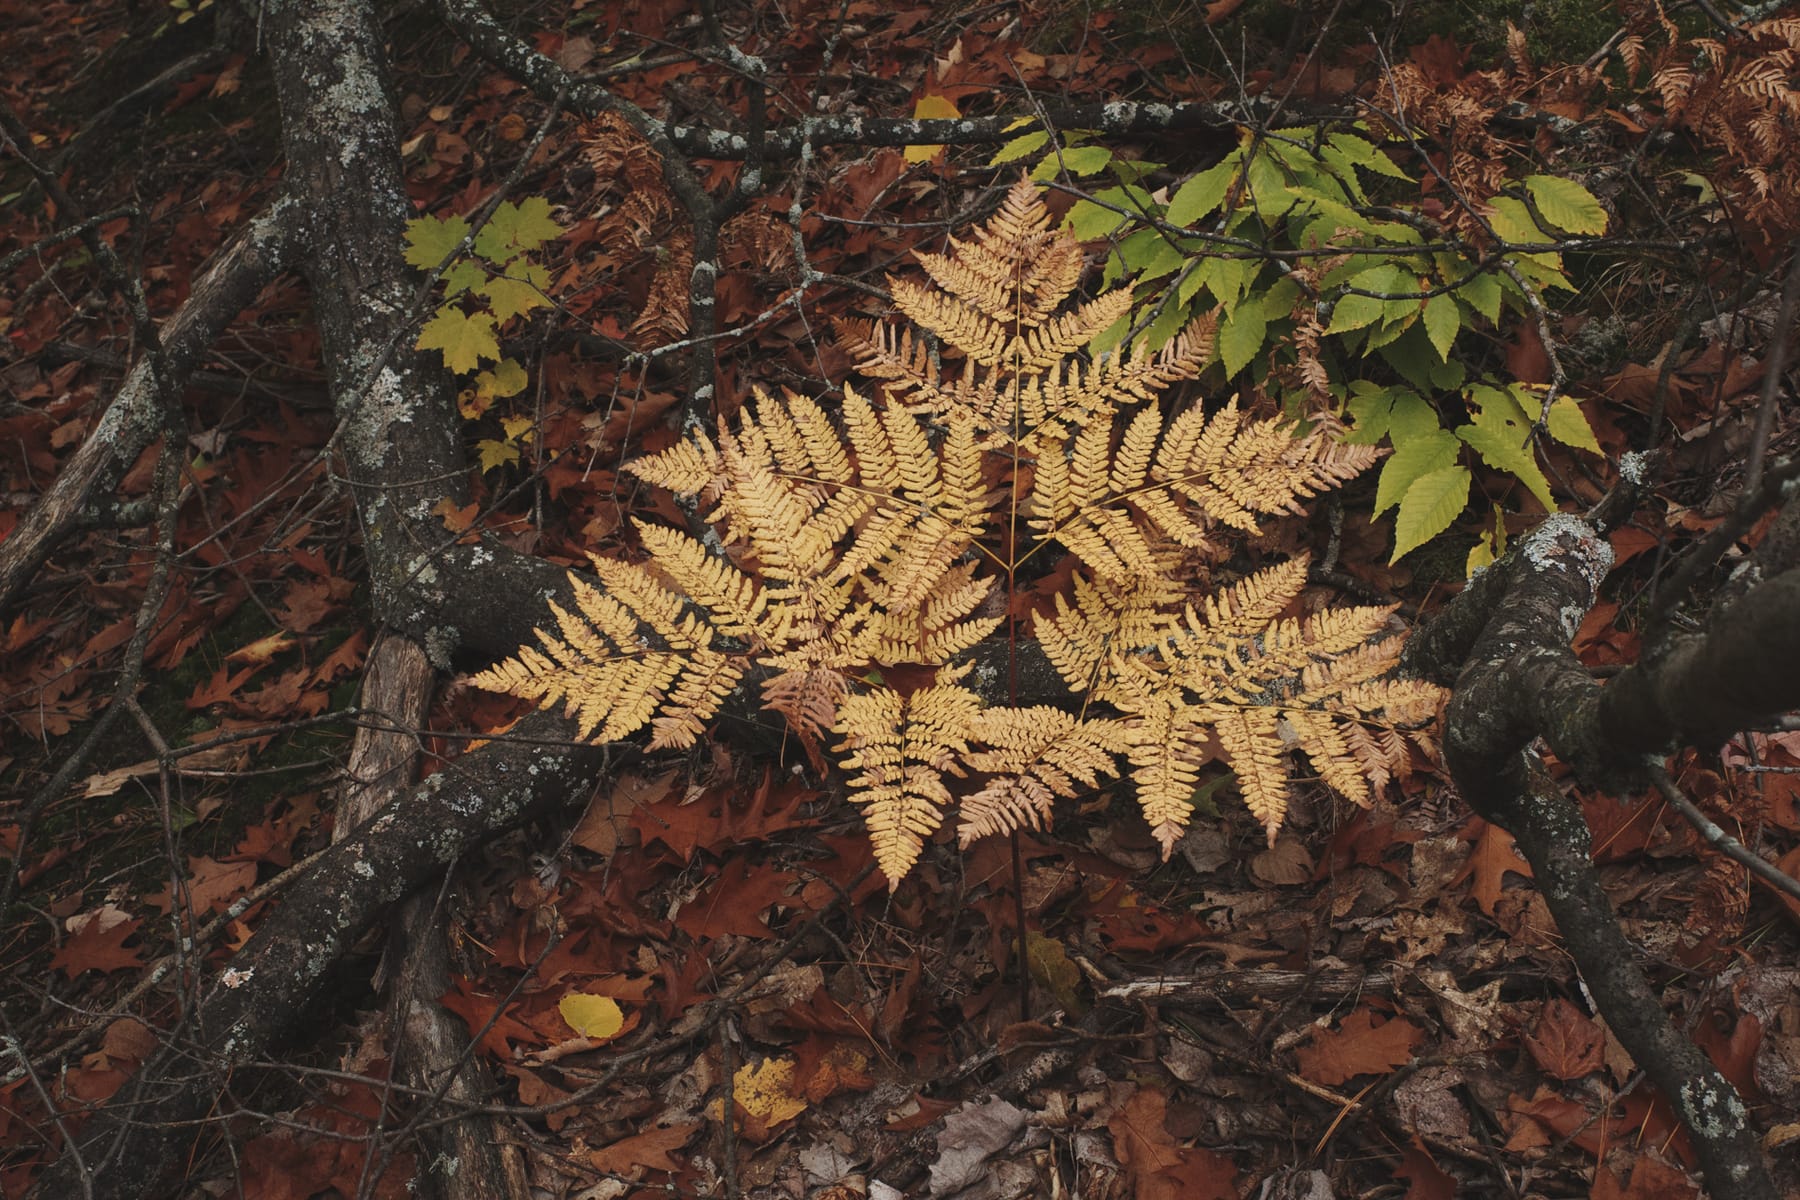 Yellow fall fern from lichenous forest floor, full of decomposing leaves.  